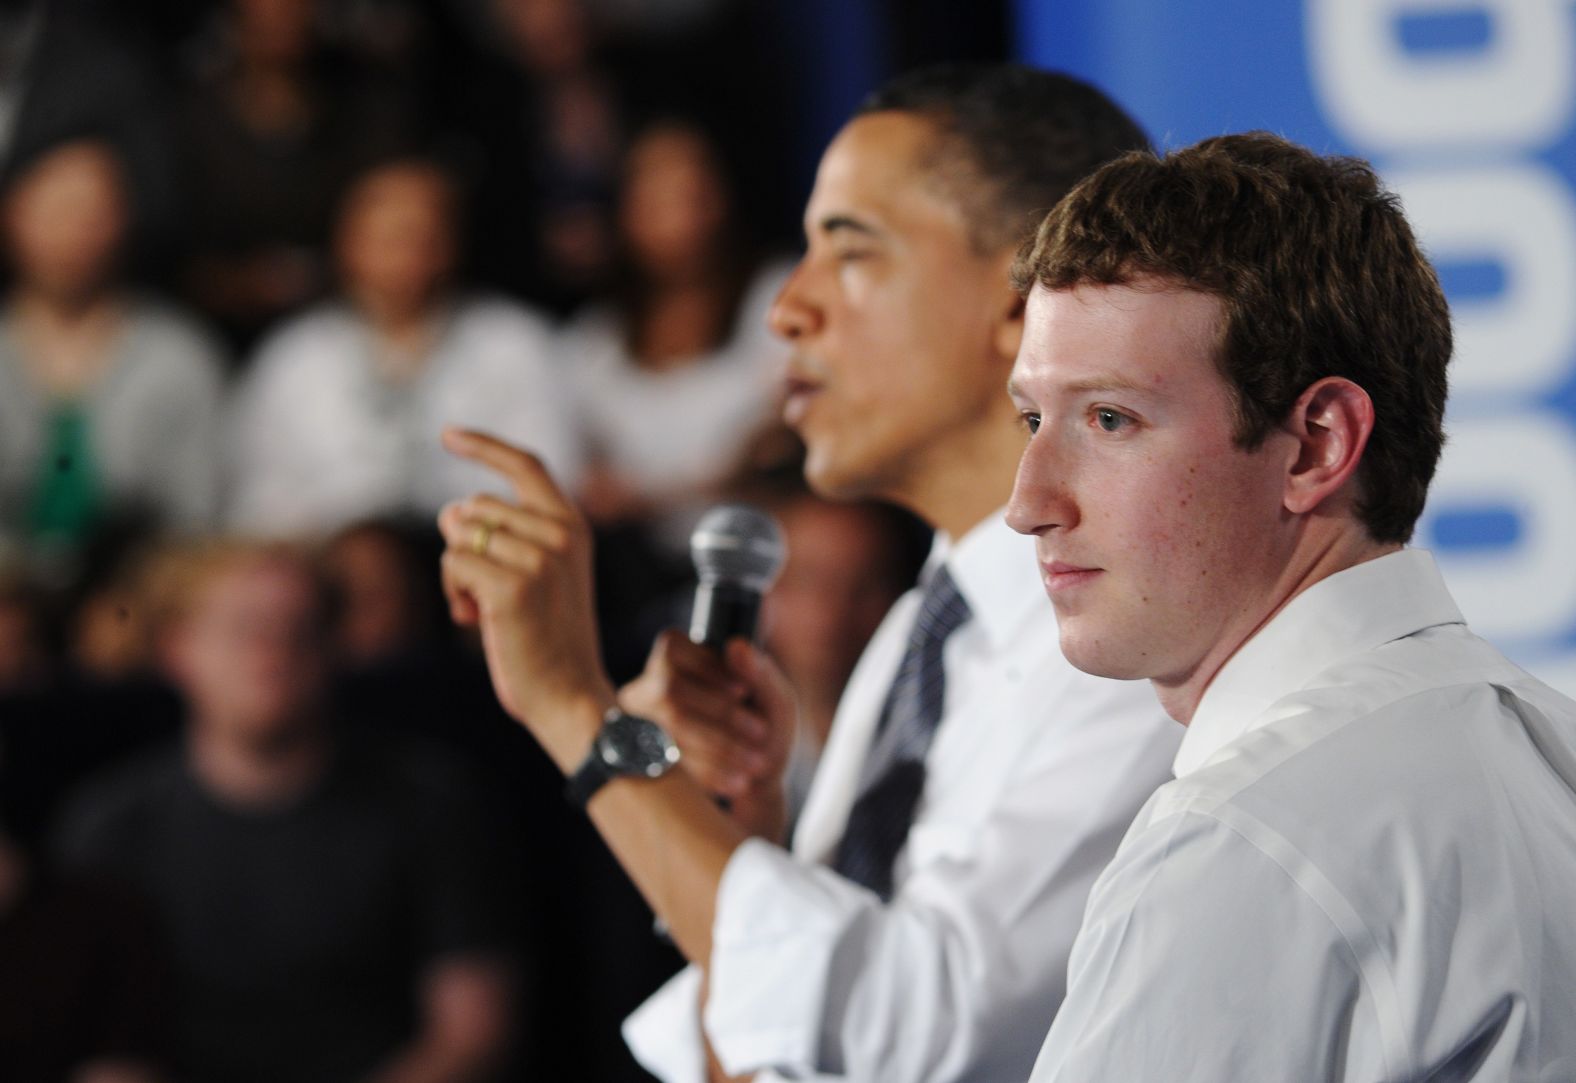 Zuckerberg joins President Barack Obama on stage as Obama speaks at a town-hall meeting at Facebook's headquarters in April 2011.